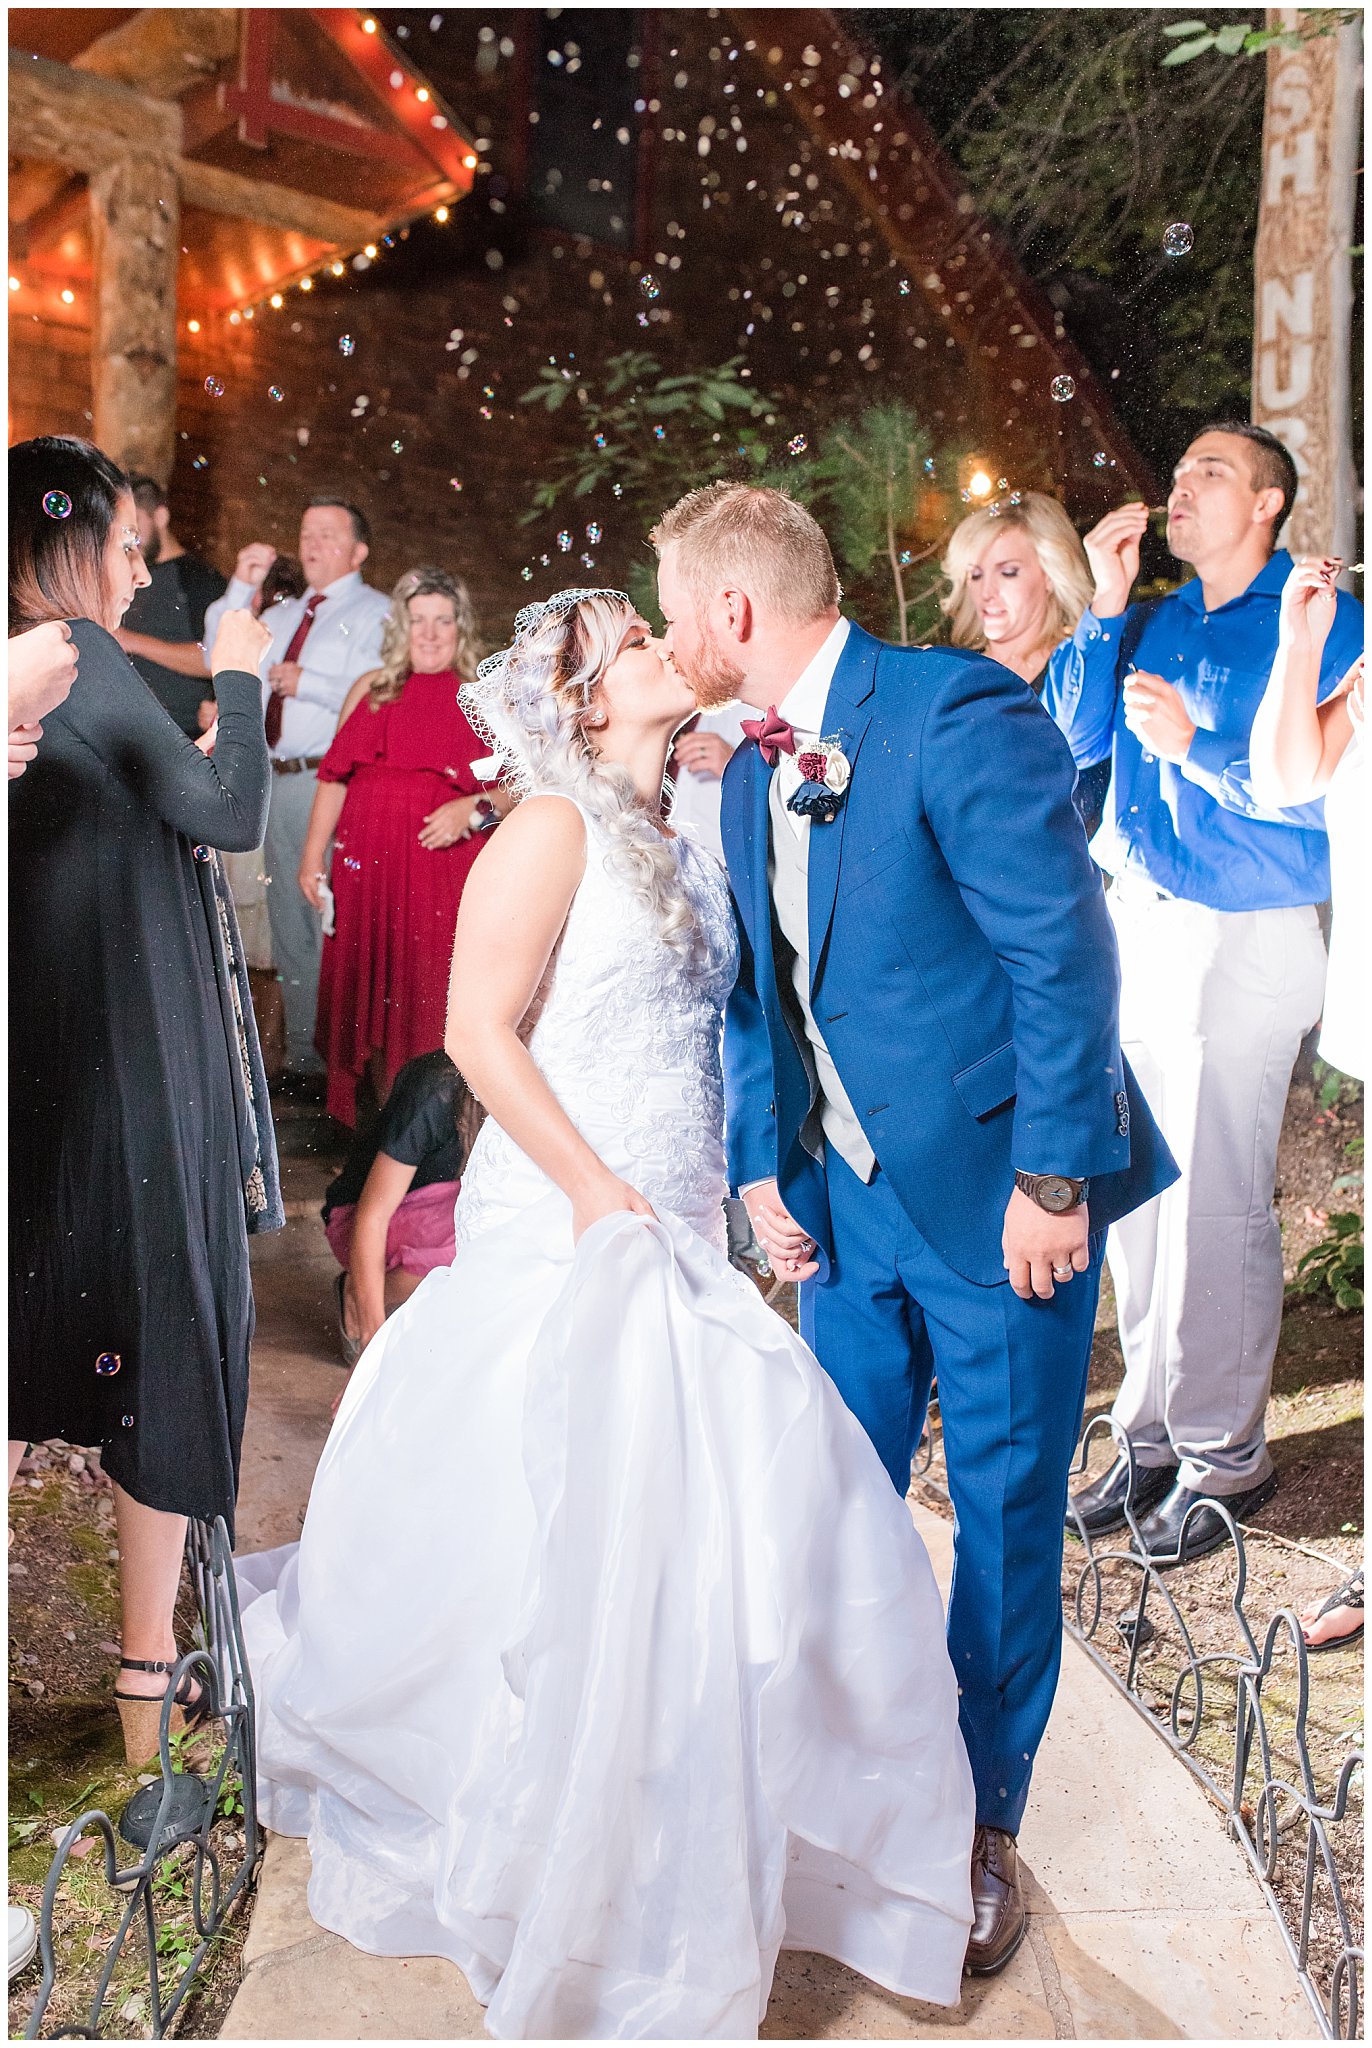 Bride and groom bubble and lavender bud exit and sendoff | Top Utah Wedding and Couples Photos 2019 | Jessie and Dallin Photography